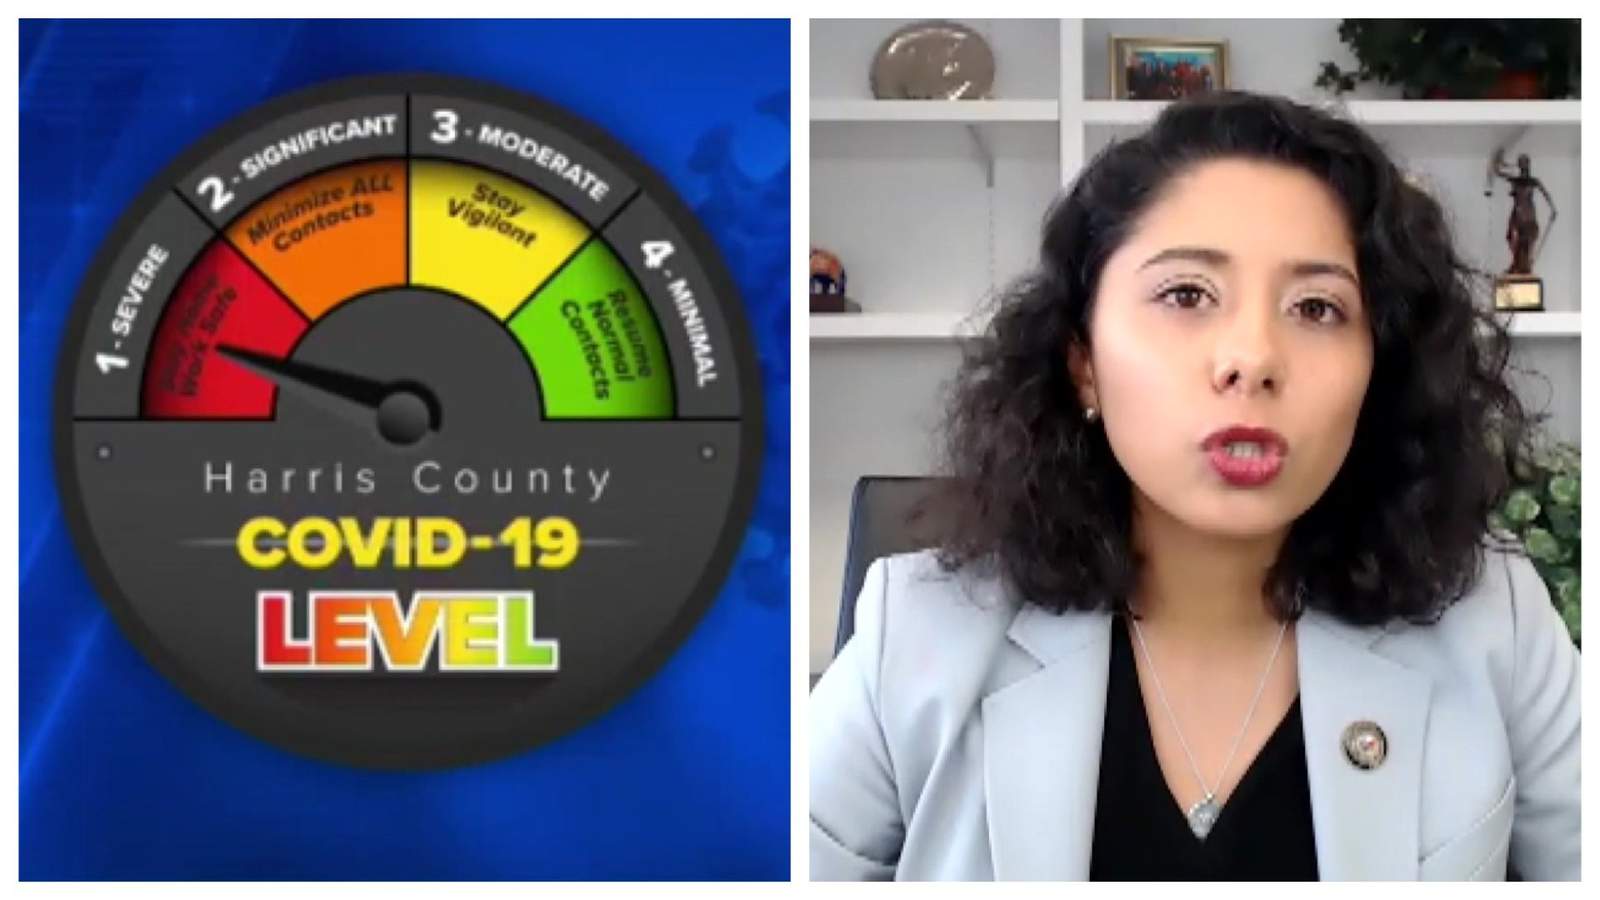 ‘We’re very close.': Why Harris County Judge says she’s not yet ready to lower COVID-19 threat level but could do so soon